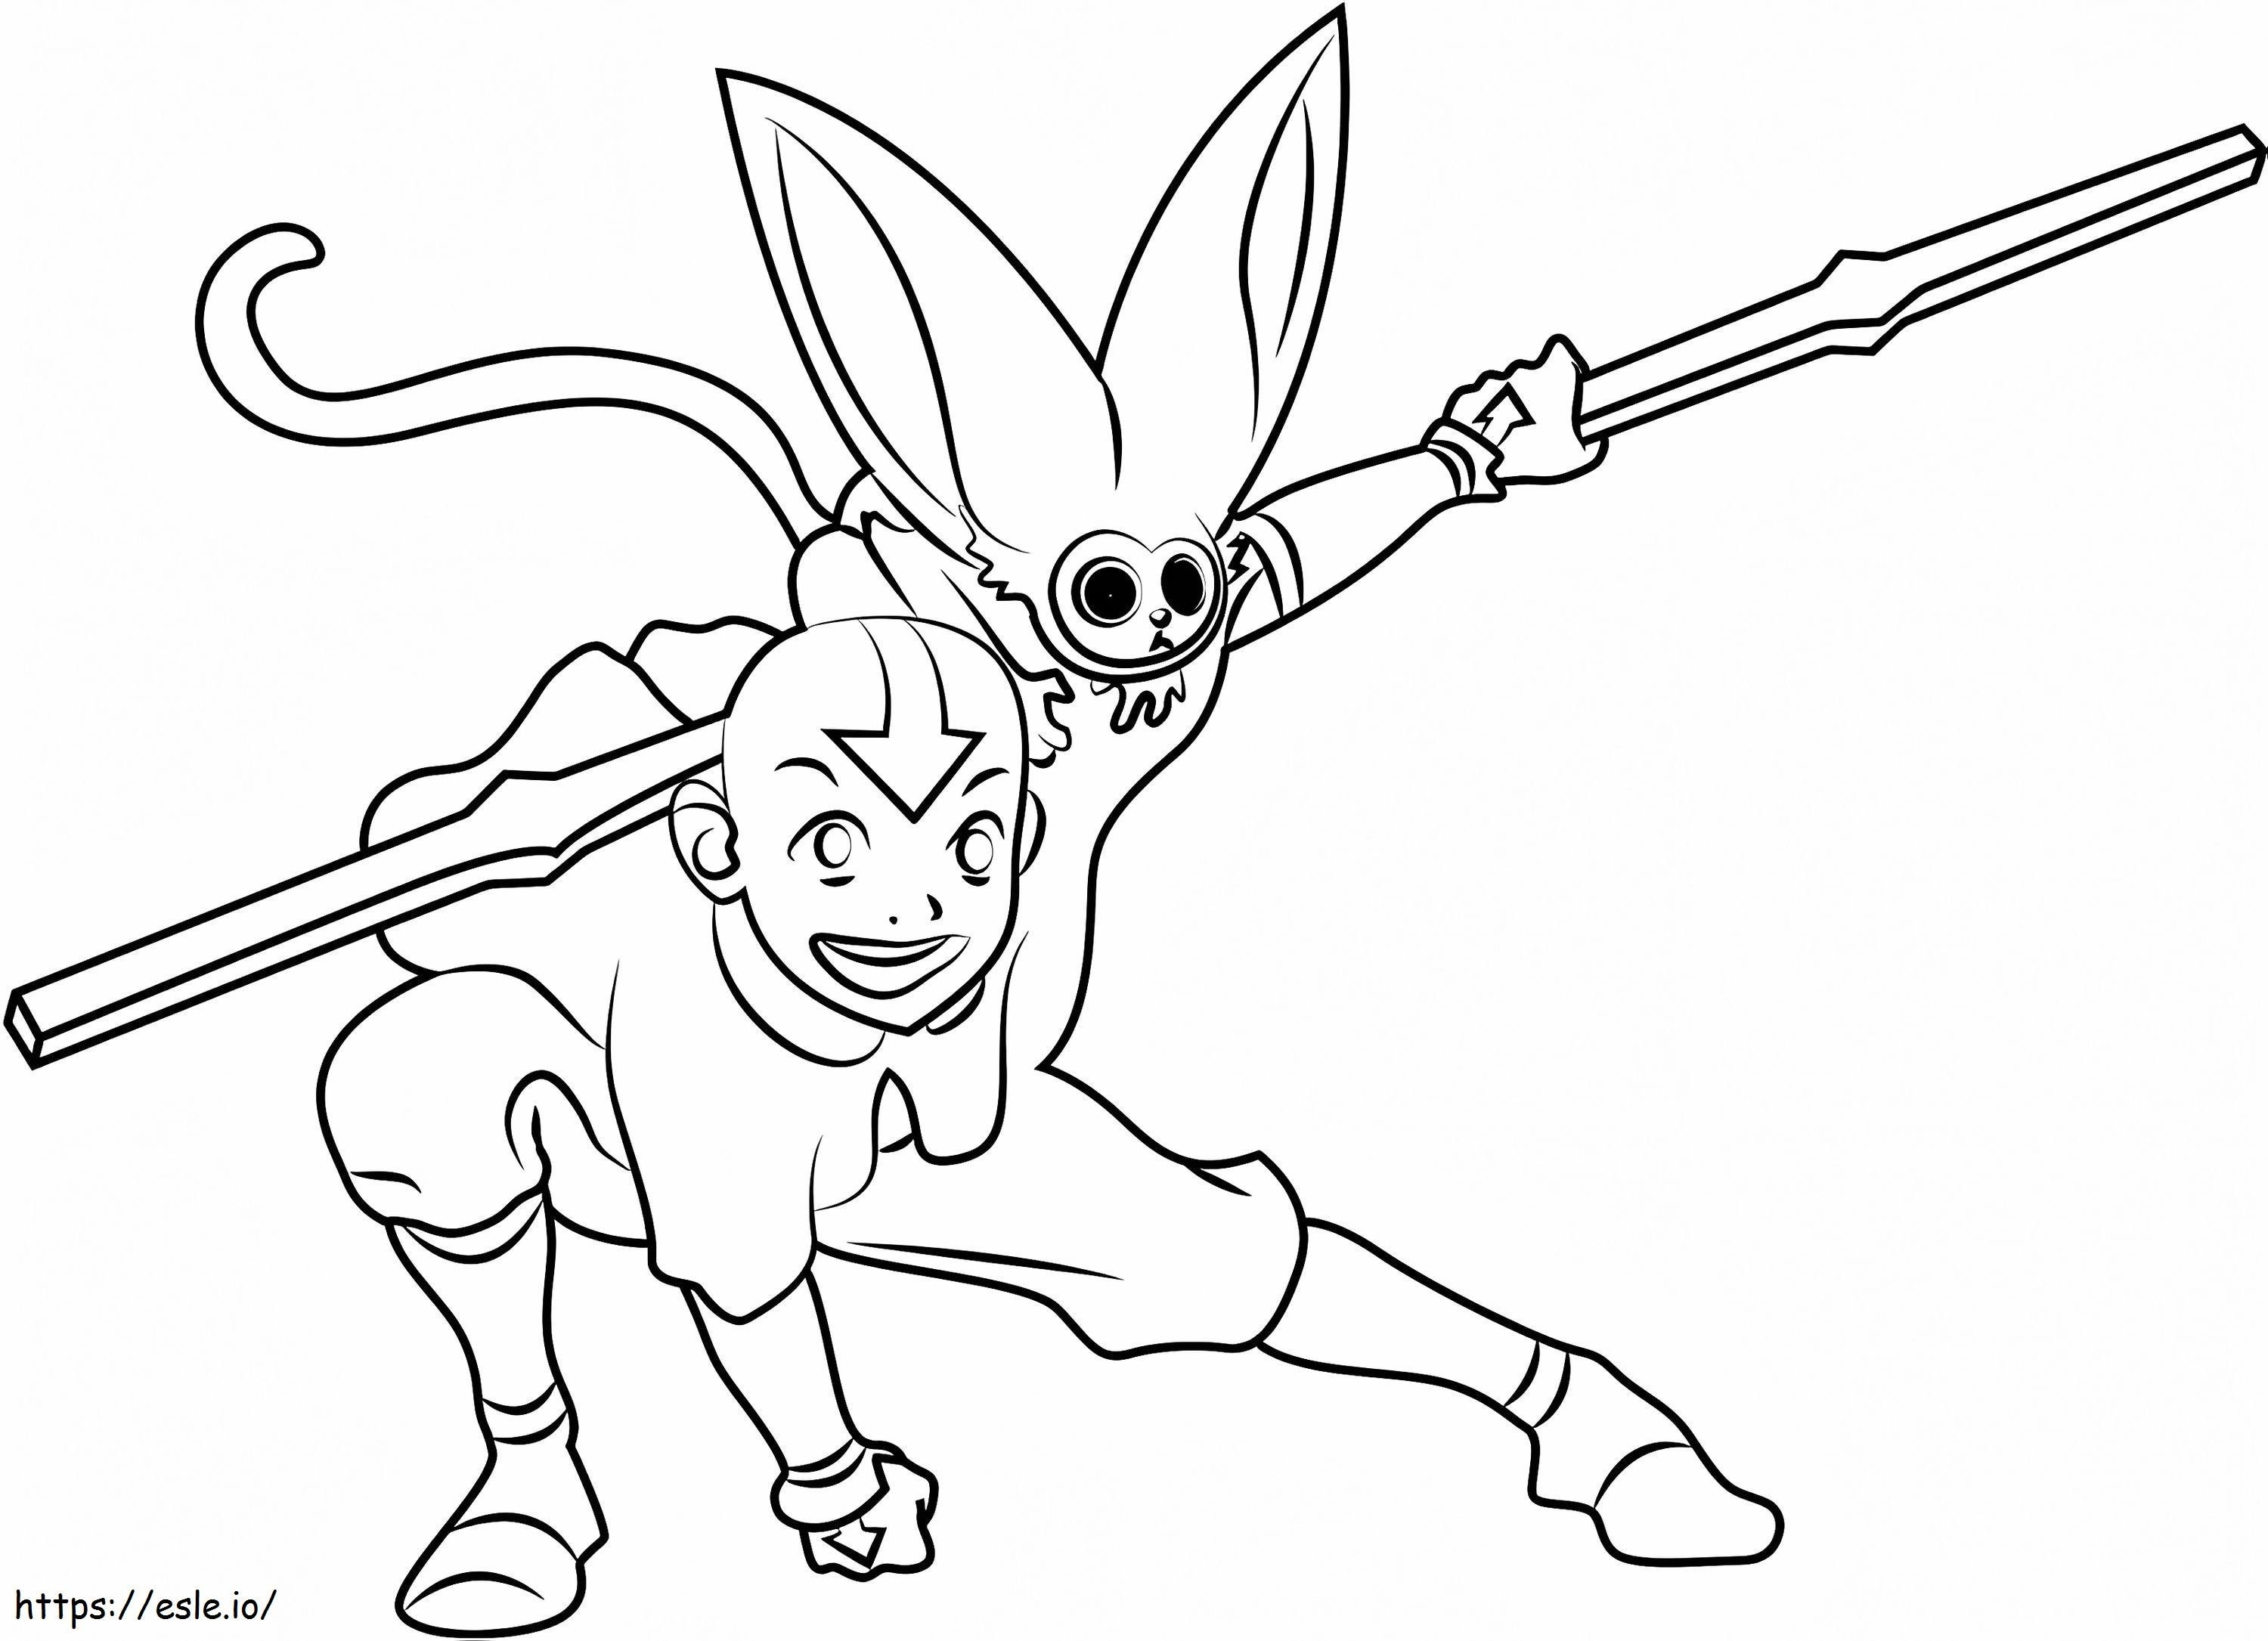 1532490947 Happy Aang A4 E1600331171164 coloring page